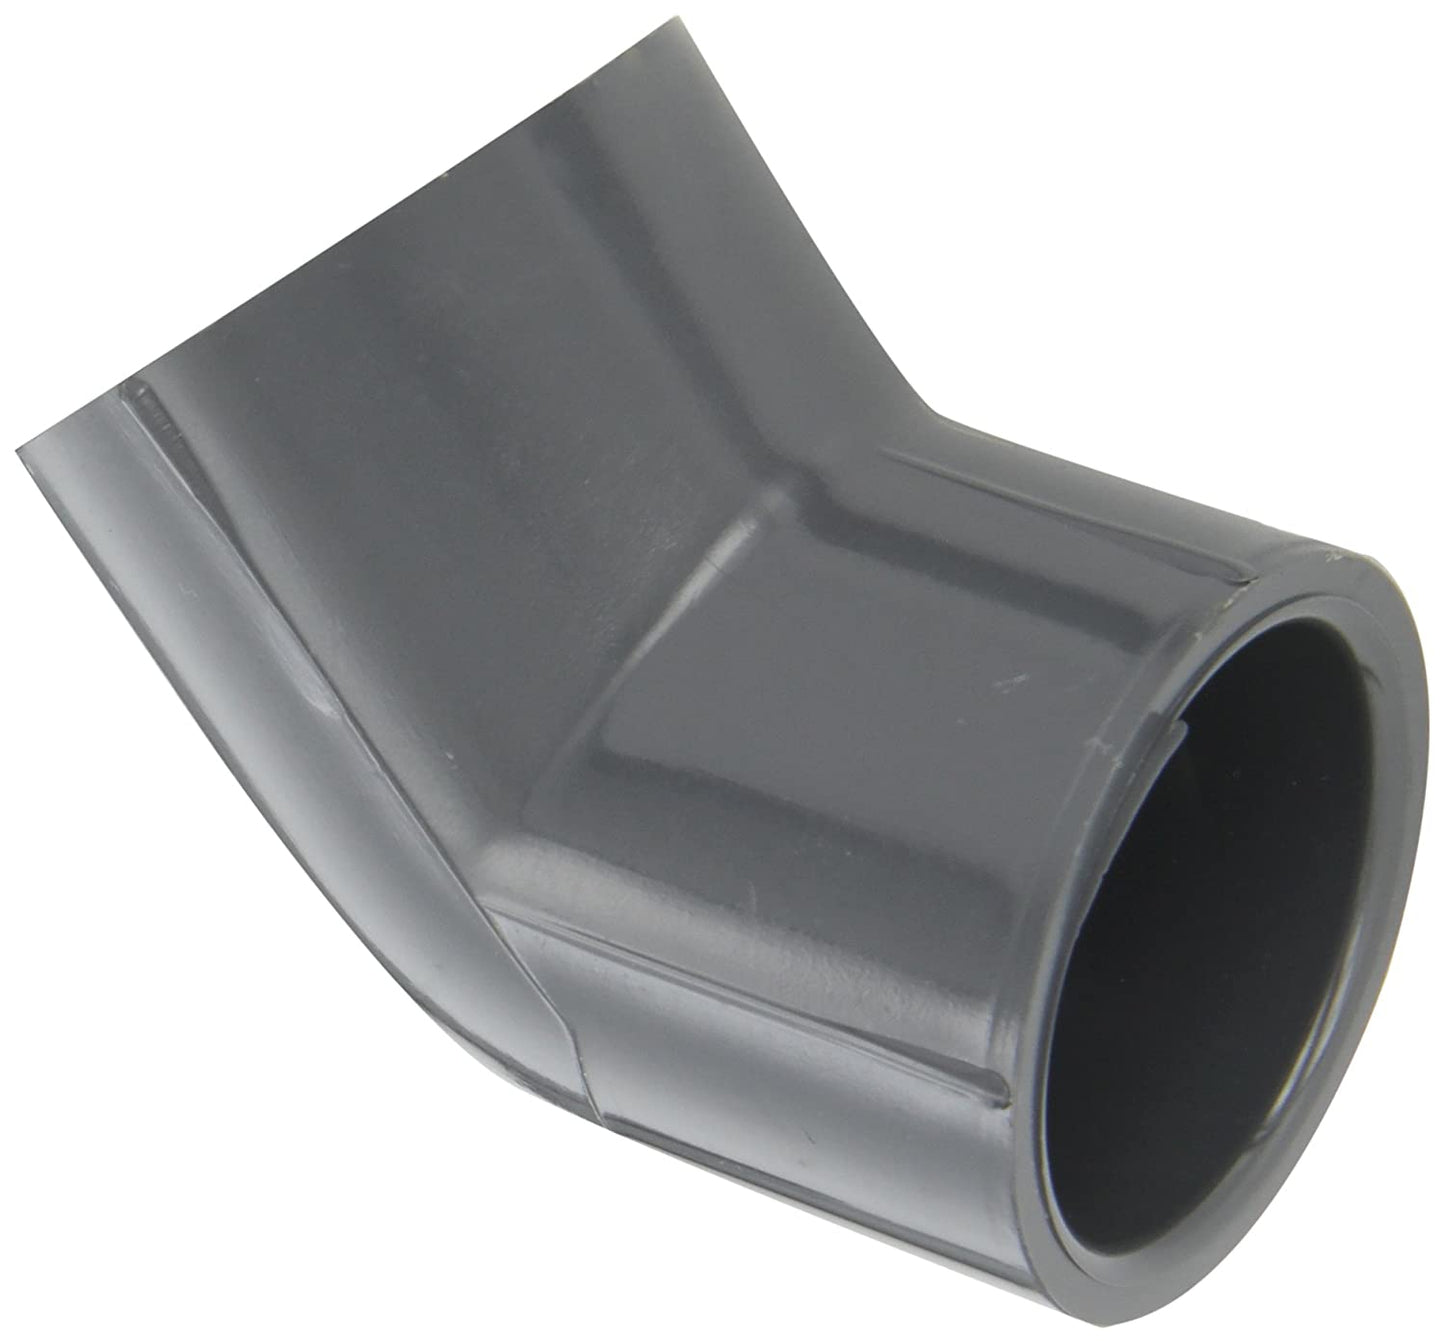 817-012 - PVC Pipe Fitting, 45 Degree Elbow, Schedule 80, 1-1/4" Socket